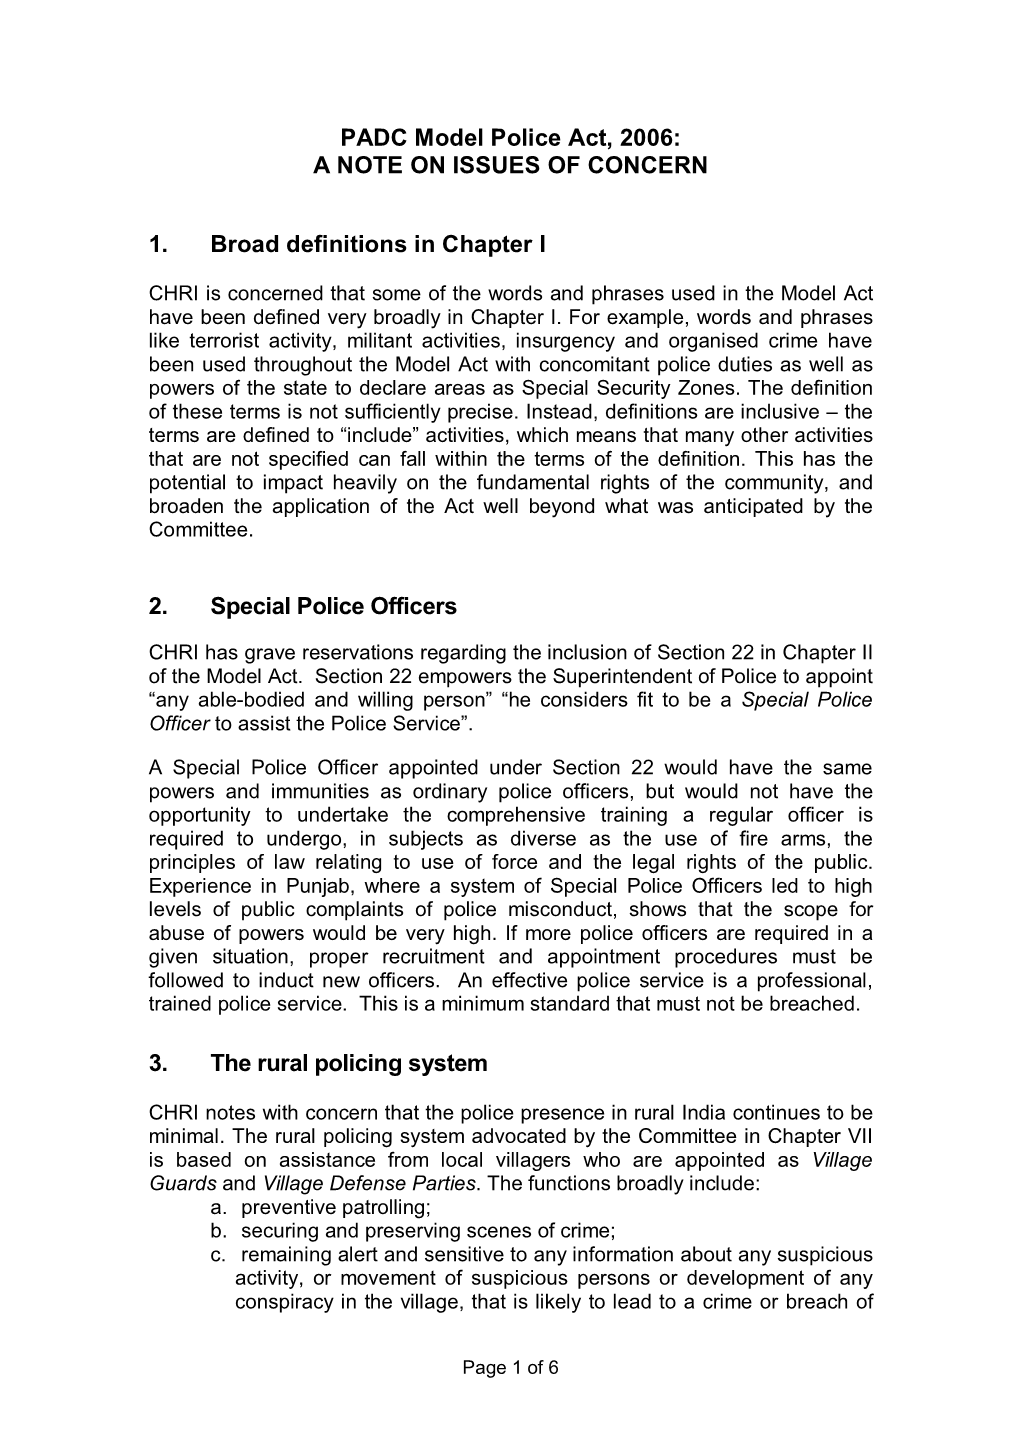 PADC Model Police Act, 2006: a NOTE on ISSUES of CONCERN 1